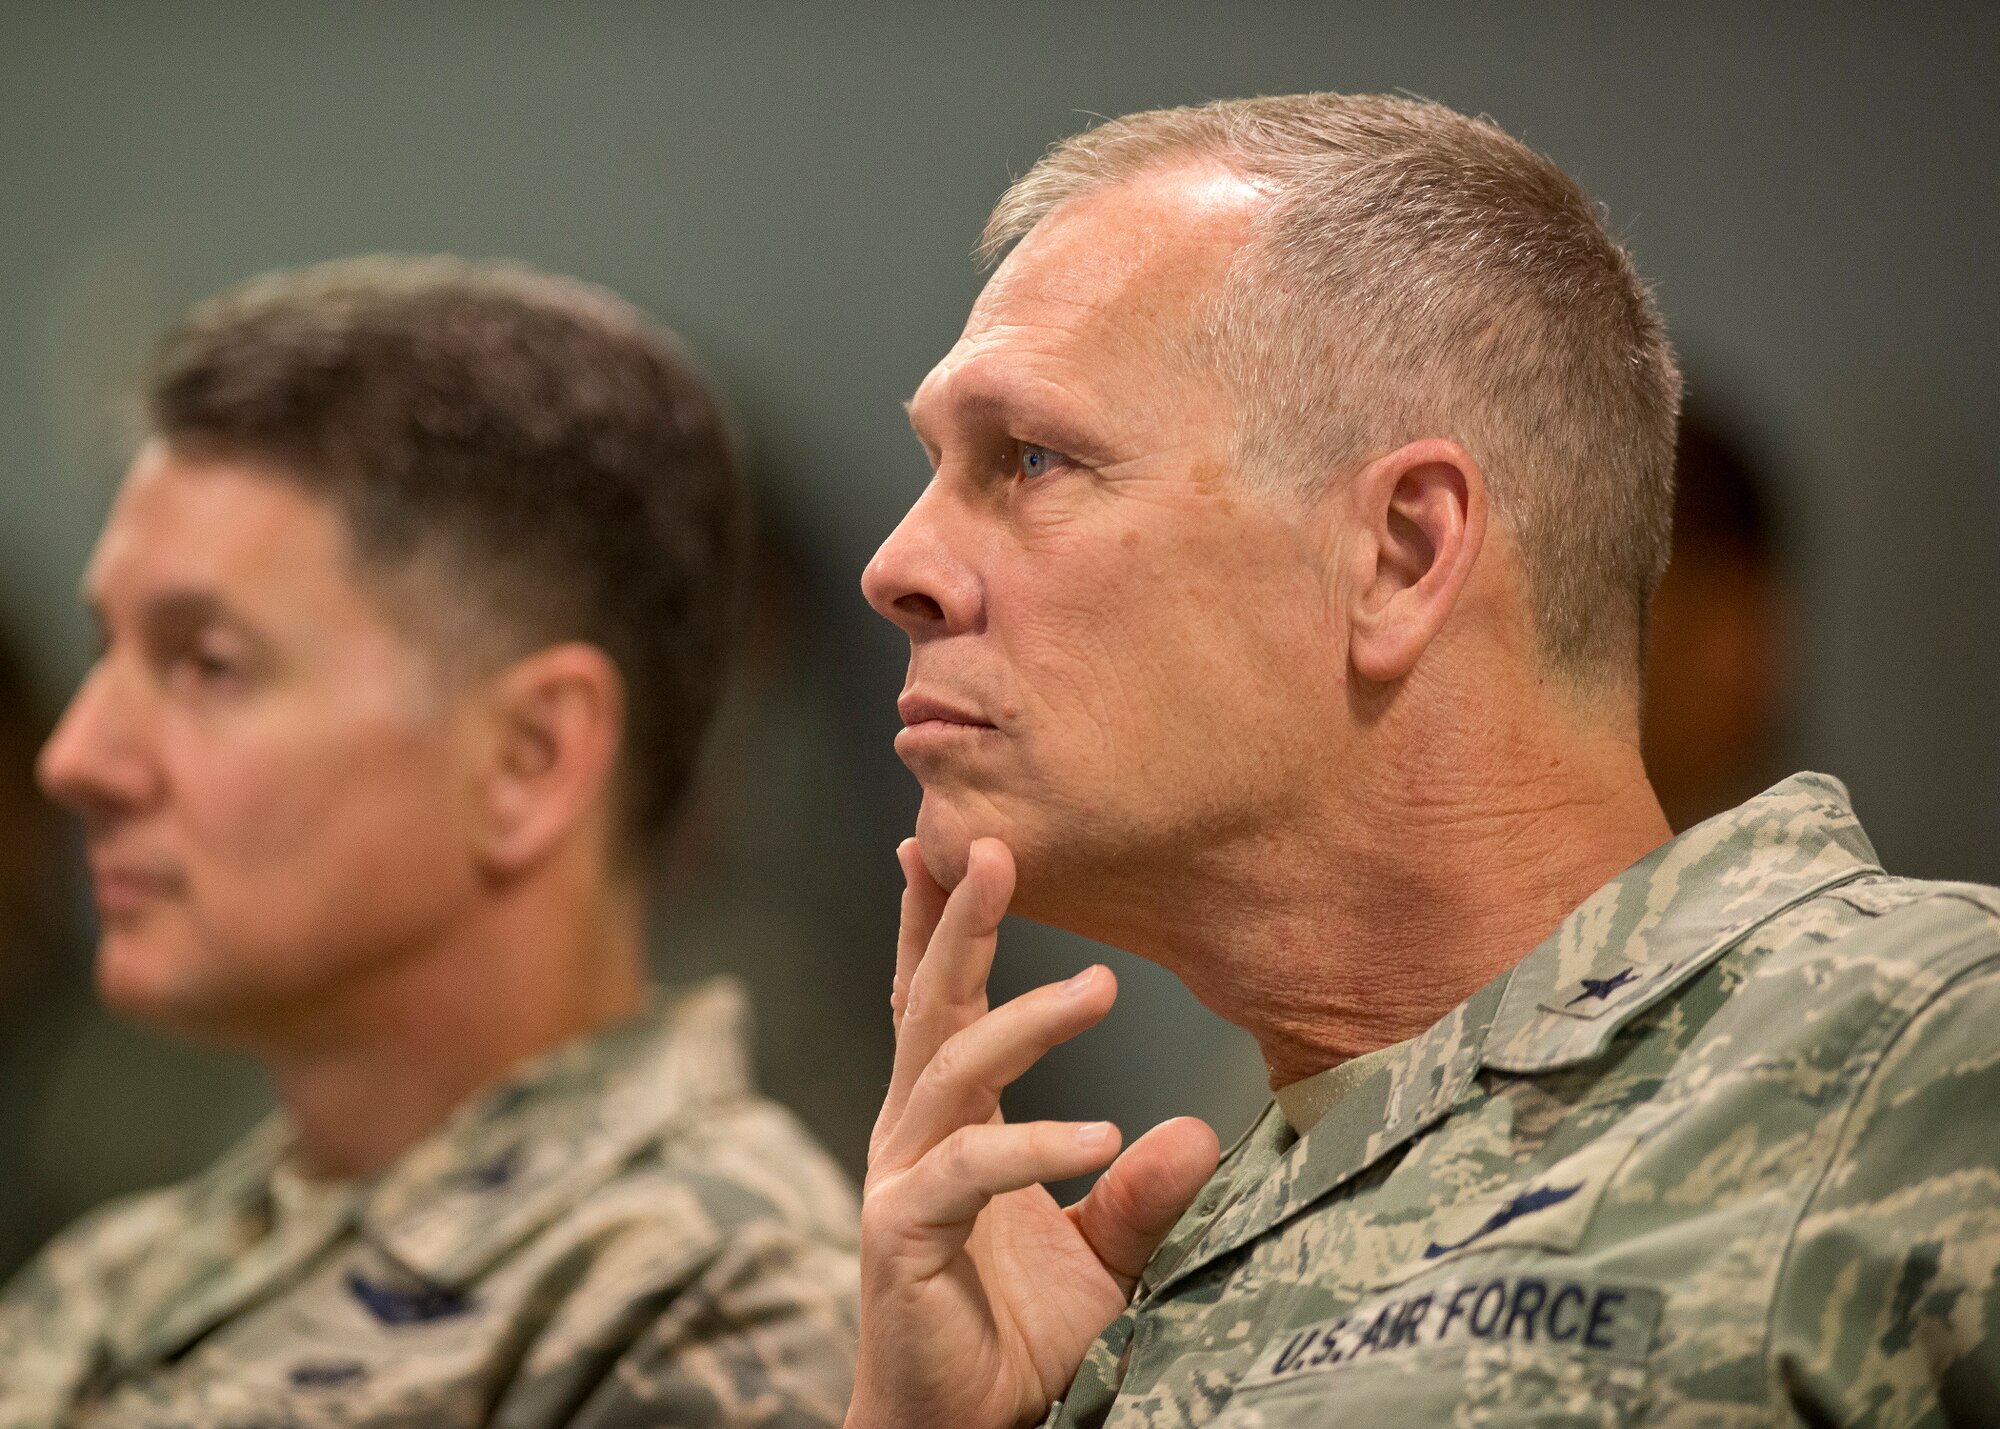 U.S. Air Force Brig. Gen. Wayne A. Zimmet, assistant adjutant general of the Puerto Rico National Guard, oversees the first PRANG State of the Commonwealth briefing, March 1, 2016. The 156th Airlift Wing leadership of the PRANG presented their SoC briefing before the Air National Guard Readiness Center at Joint Base Andrews Air Force Base, Maryland. (U.S. Air National Guard photo by Master Sgt. Marvin R. Preston)